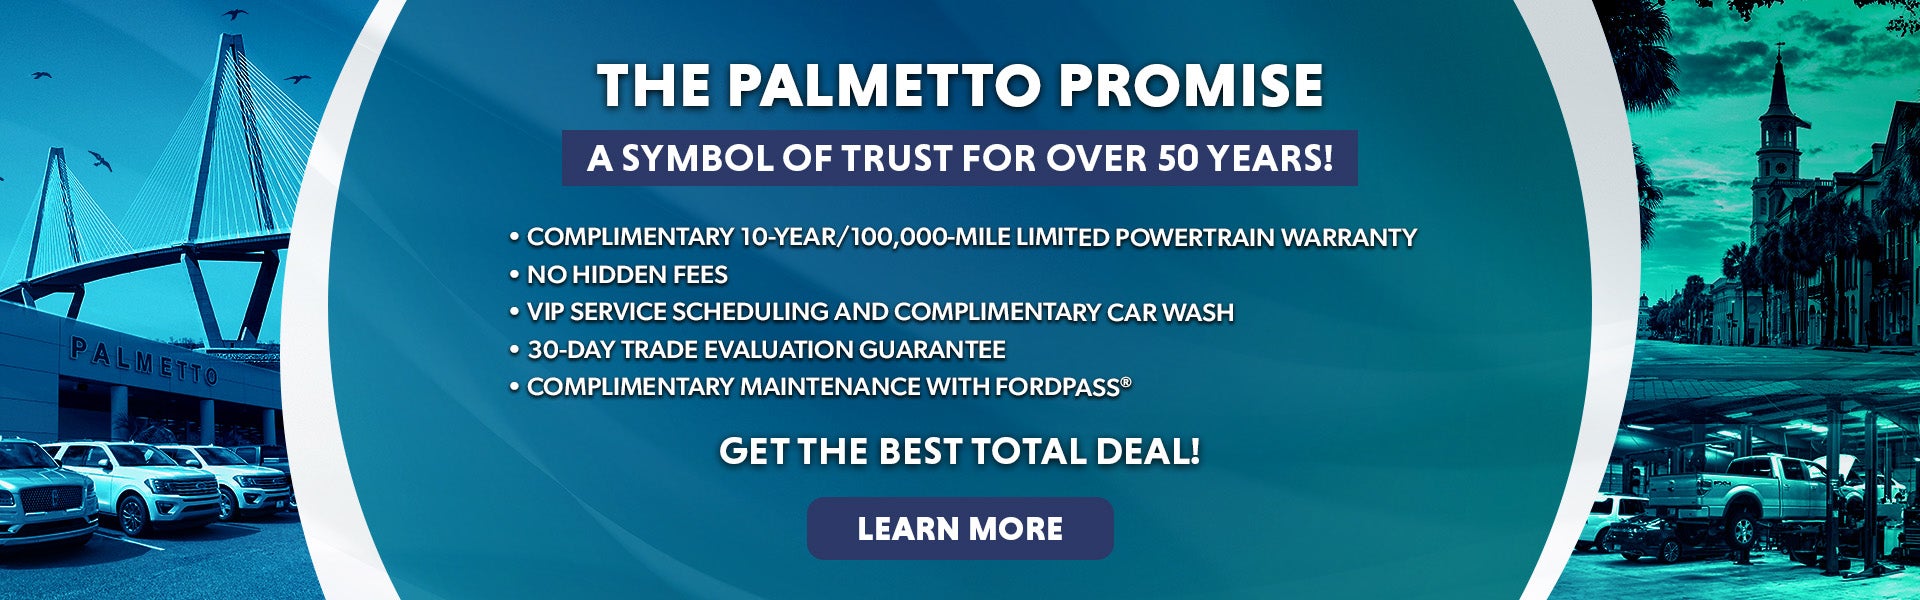 Learn More About The Palmetto Promise